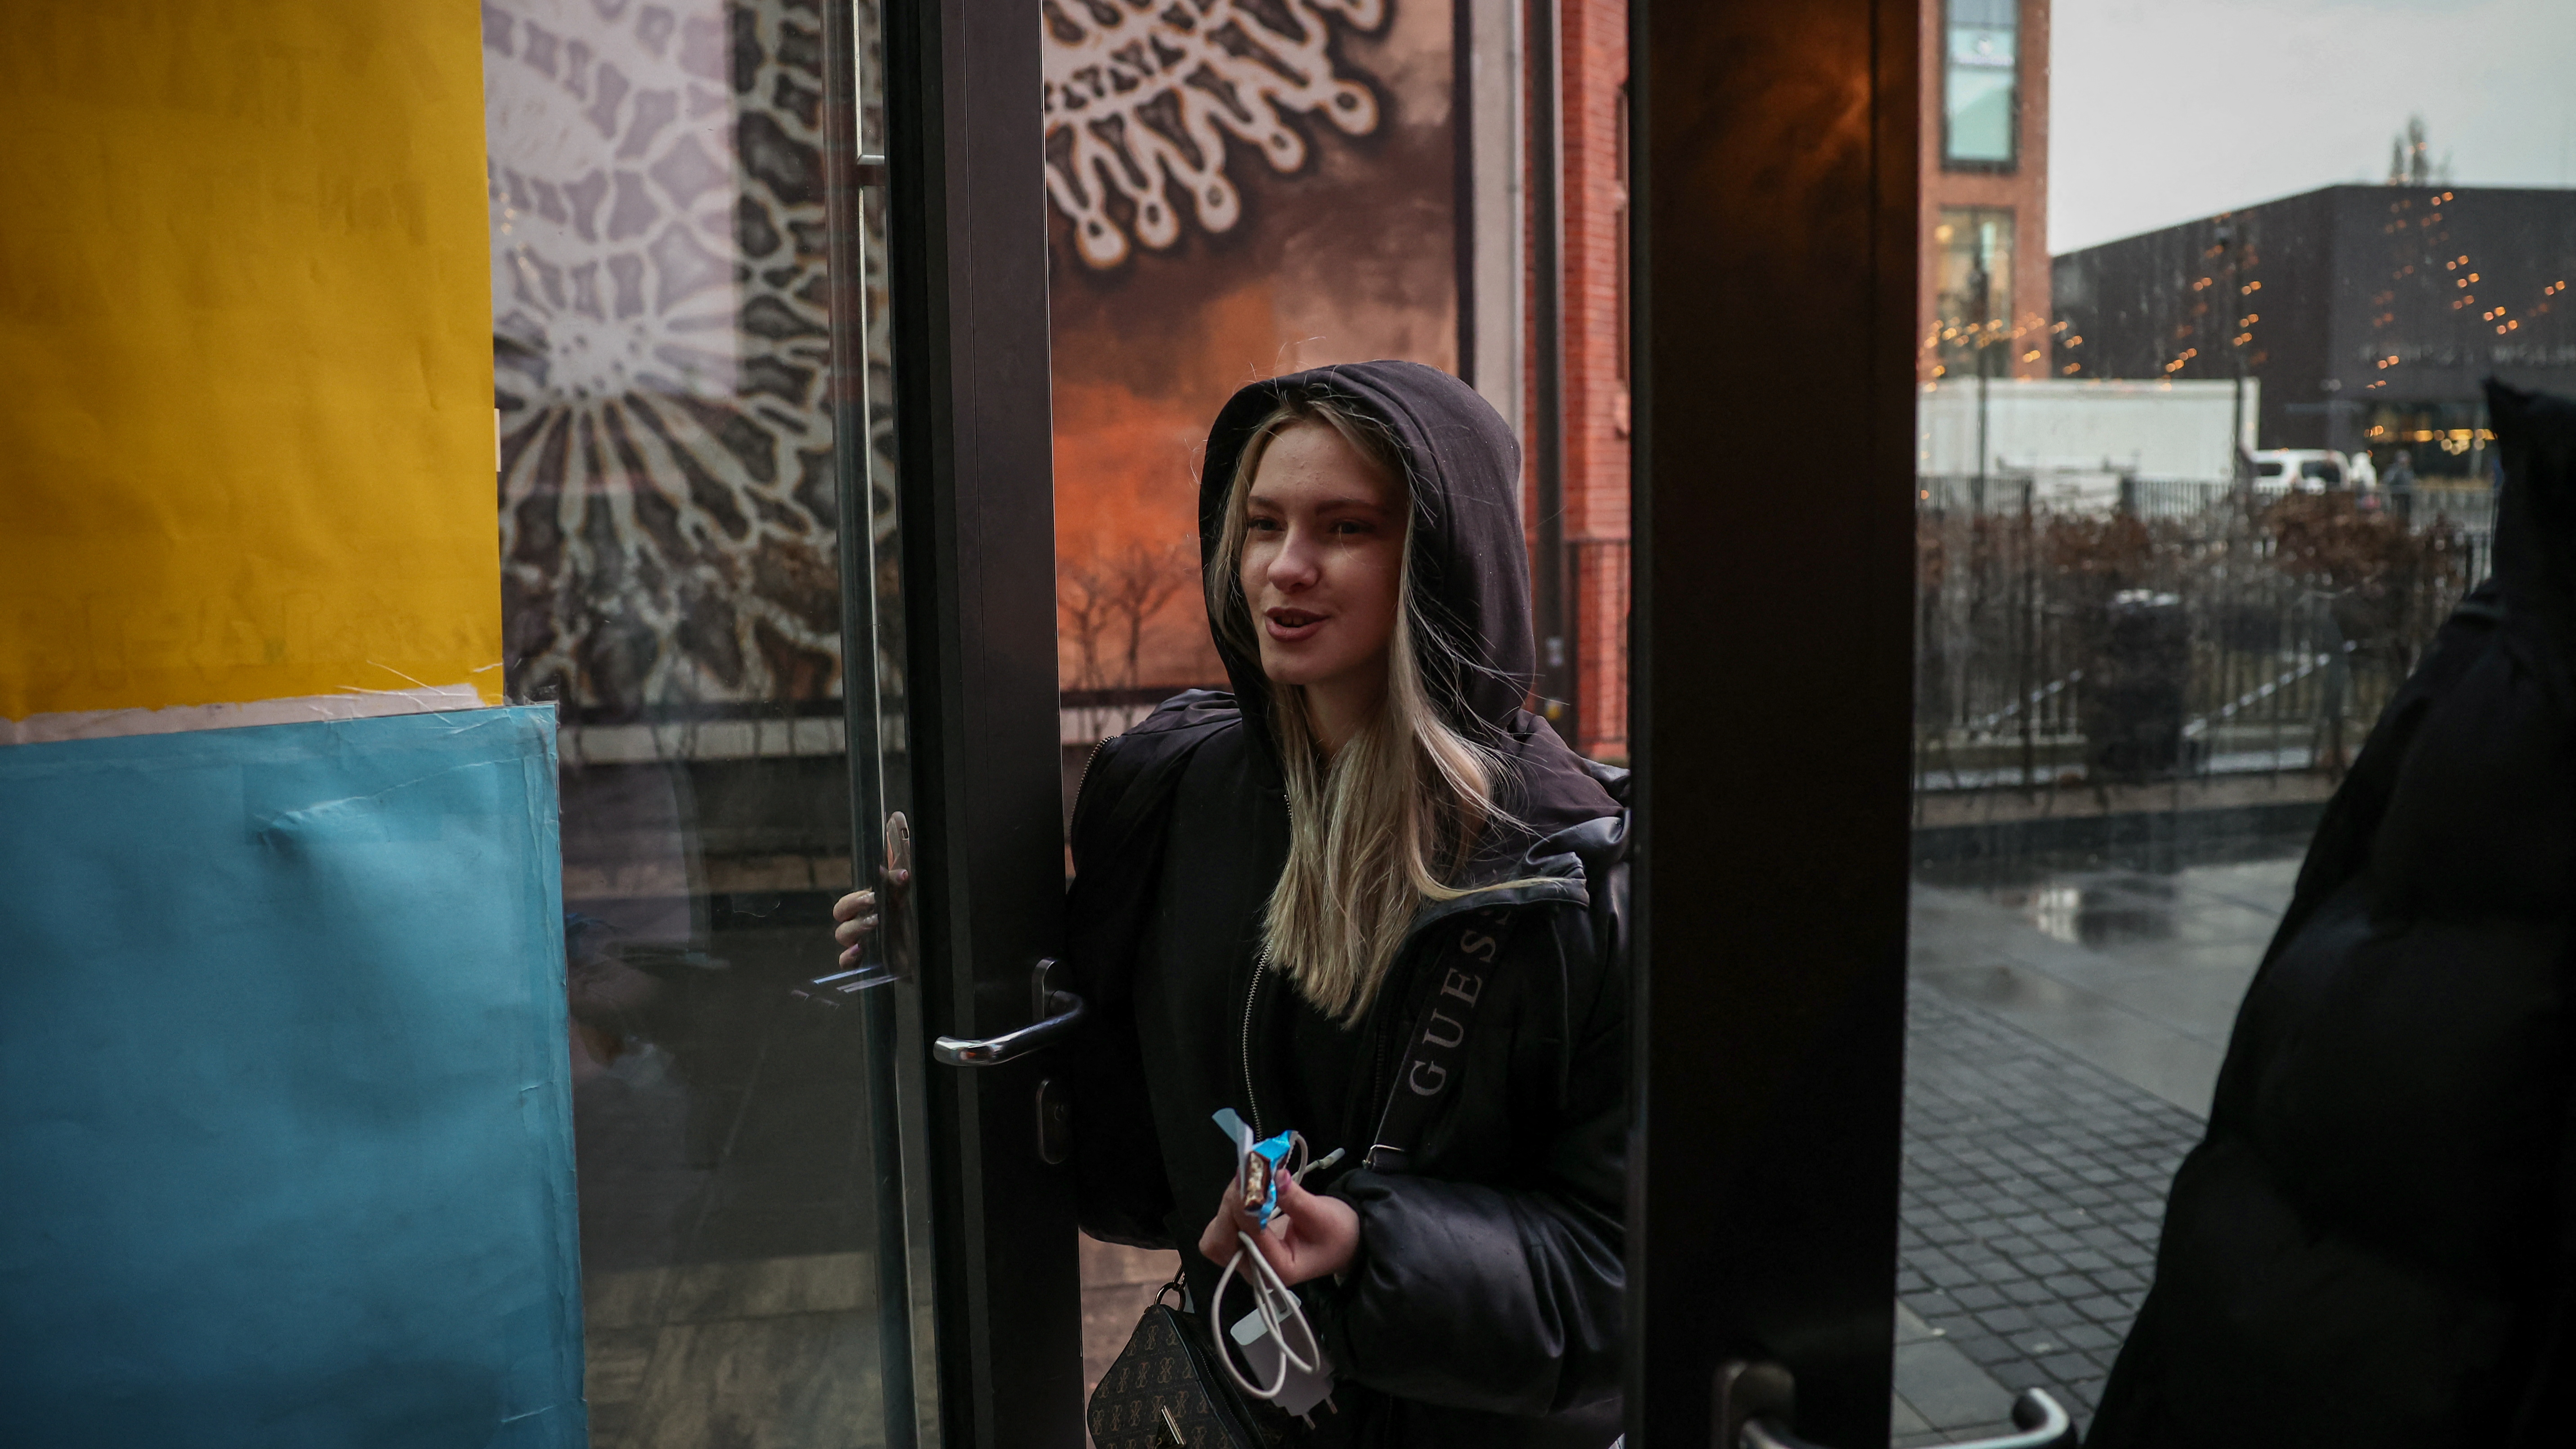 Dariia Vynohradova, 17 from Kharkiv, arrives at Blue Trainers, a community space in a shopping mall in Gdansk, Poland. Around 165,000 Ukrainian teenagers between 13 and 18 years of age are registered as refugees in Poland. /Kacper Pempel/Reuters